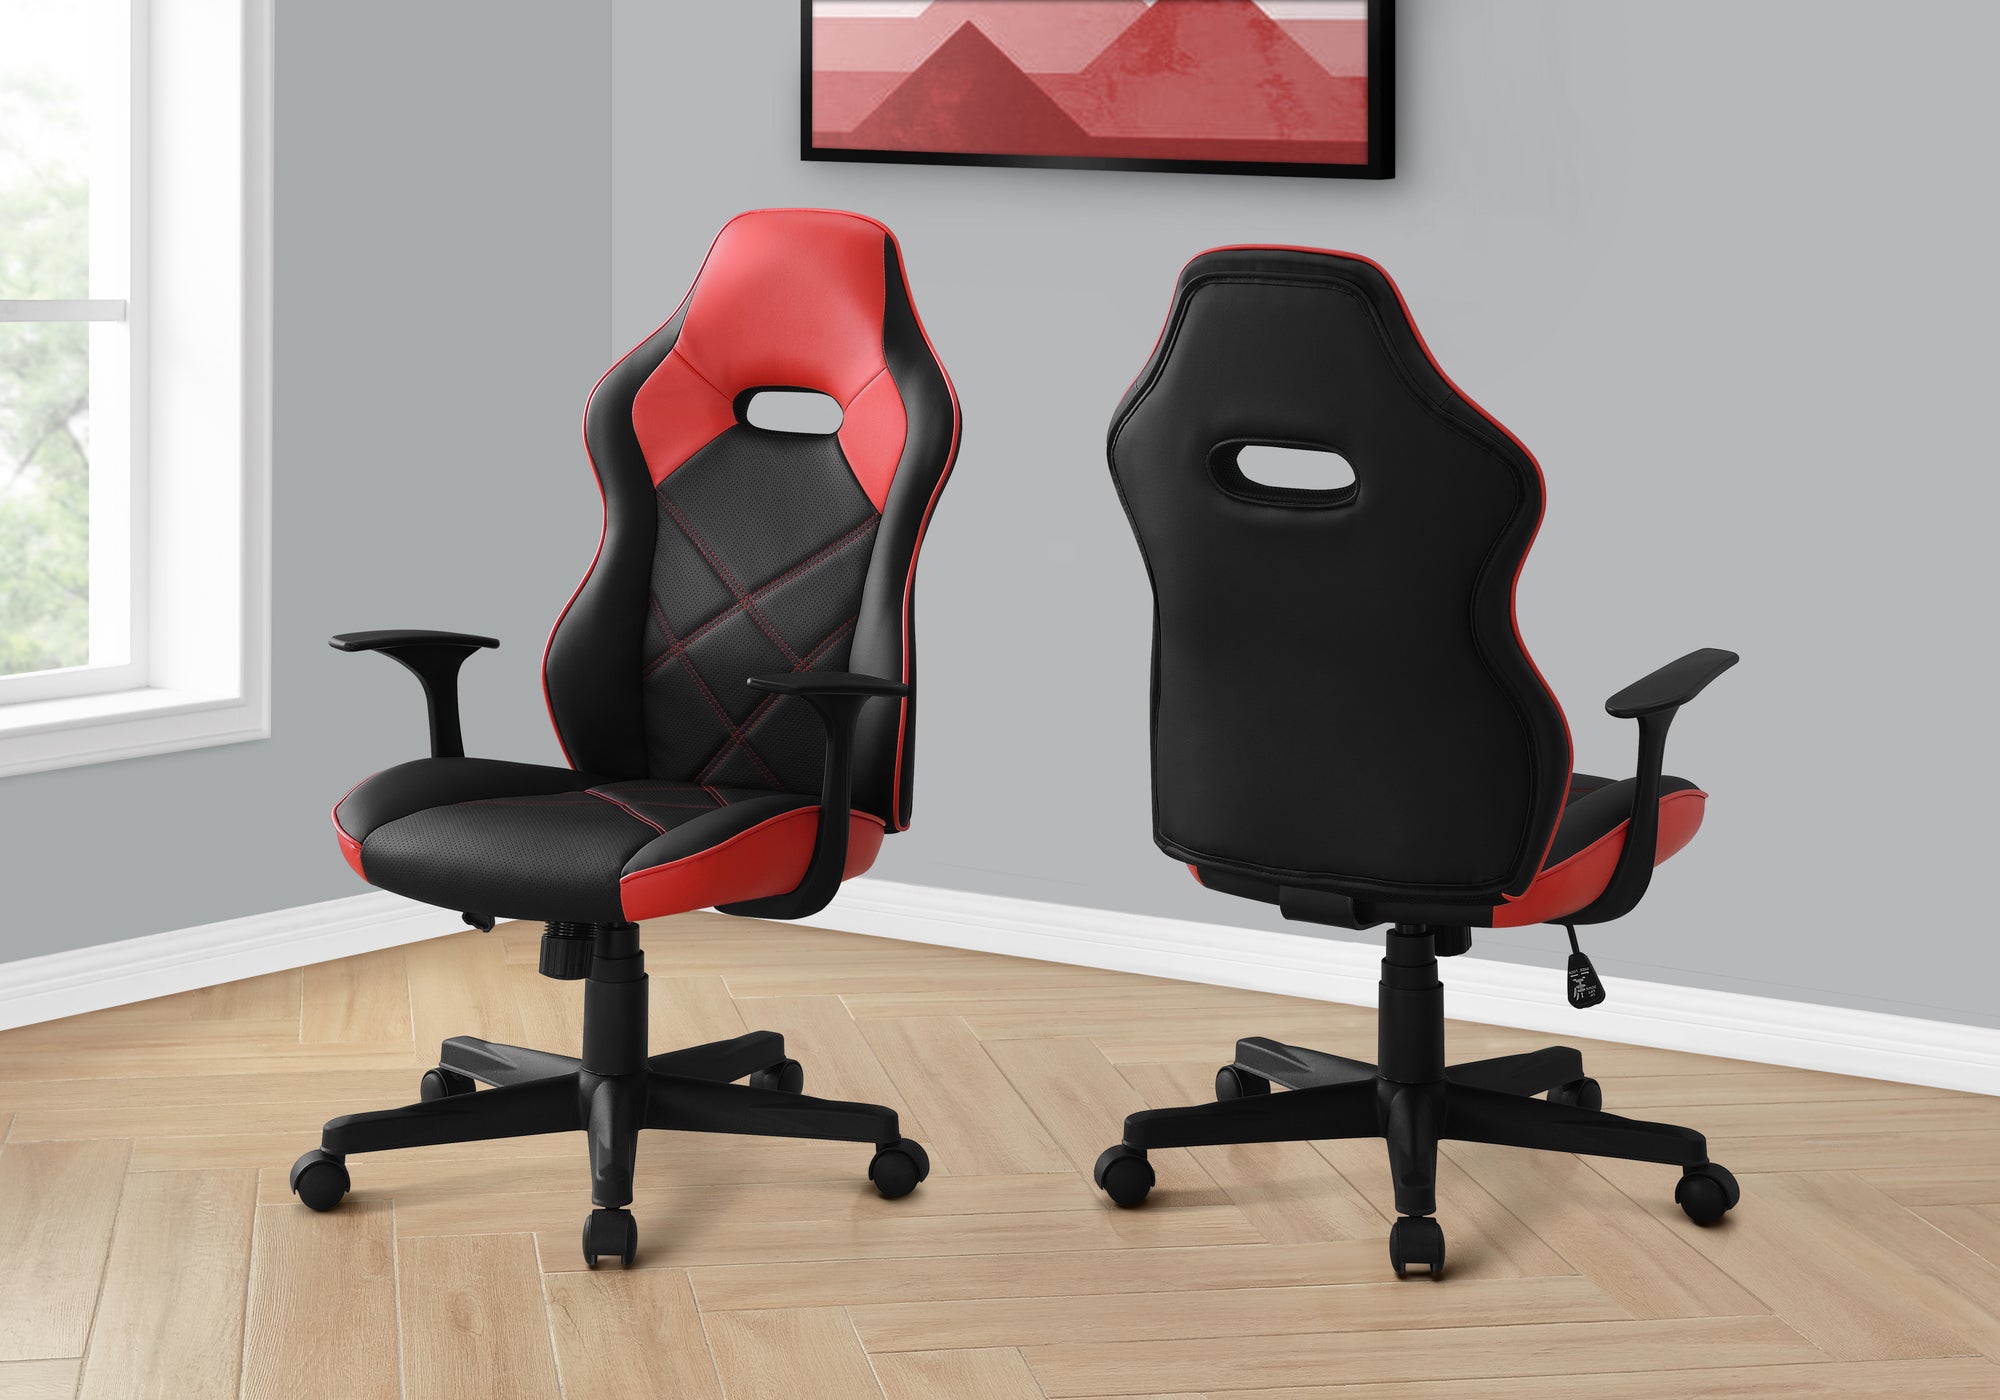 MN-267327    Office Chair - Gaming / Black / Red Leather-Look